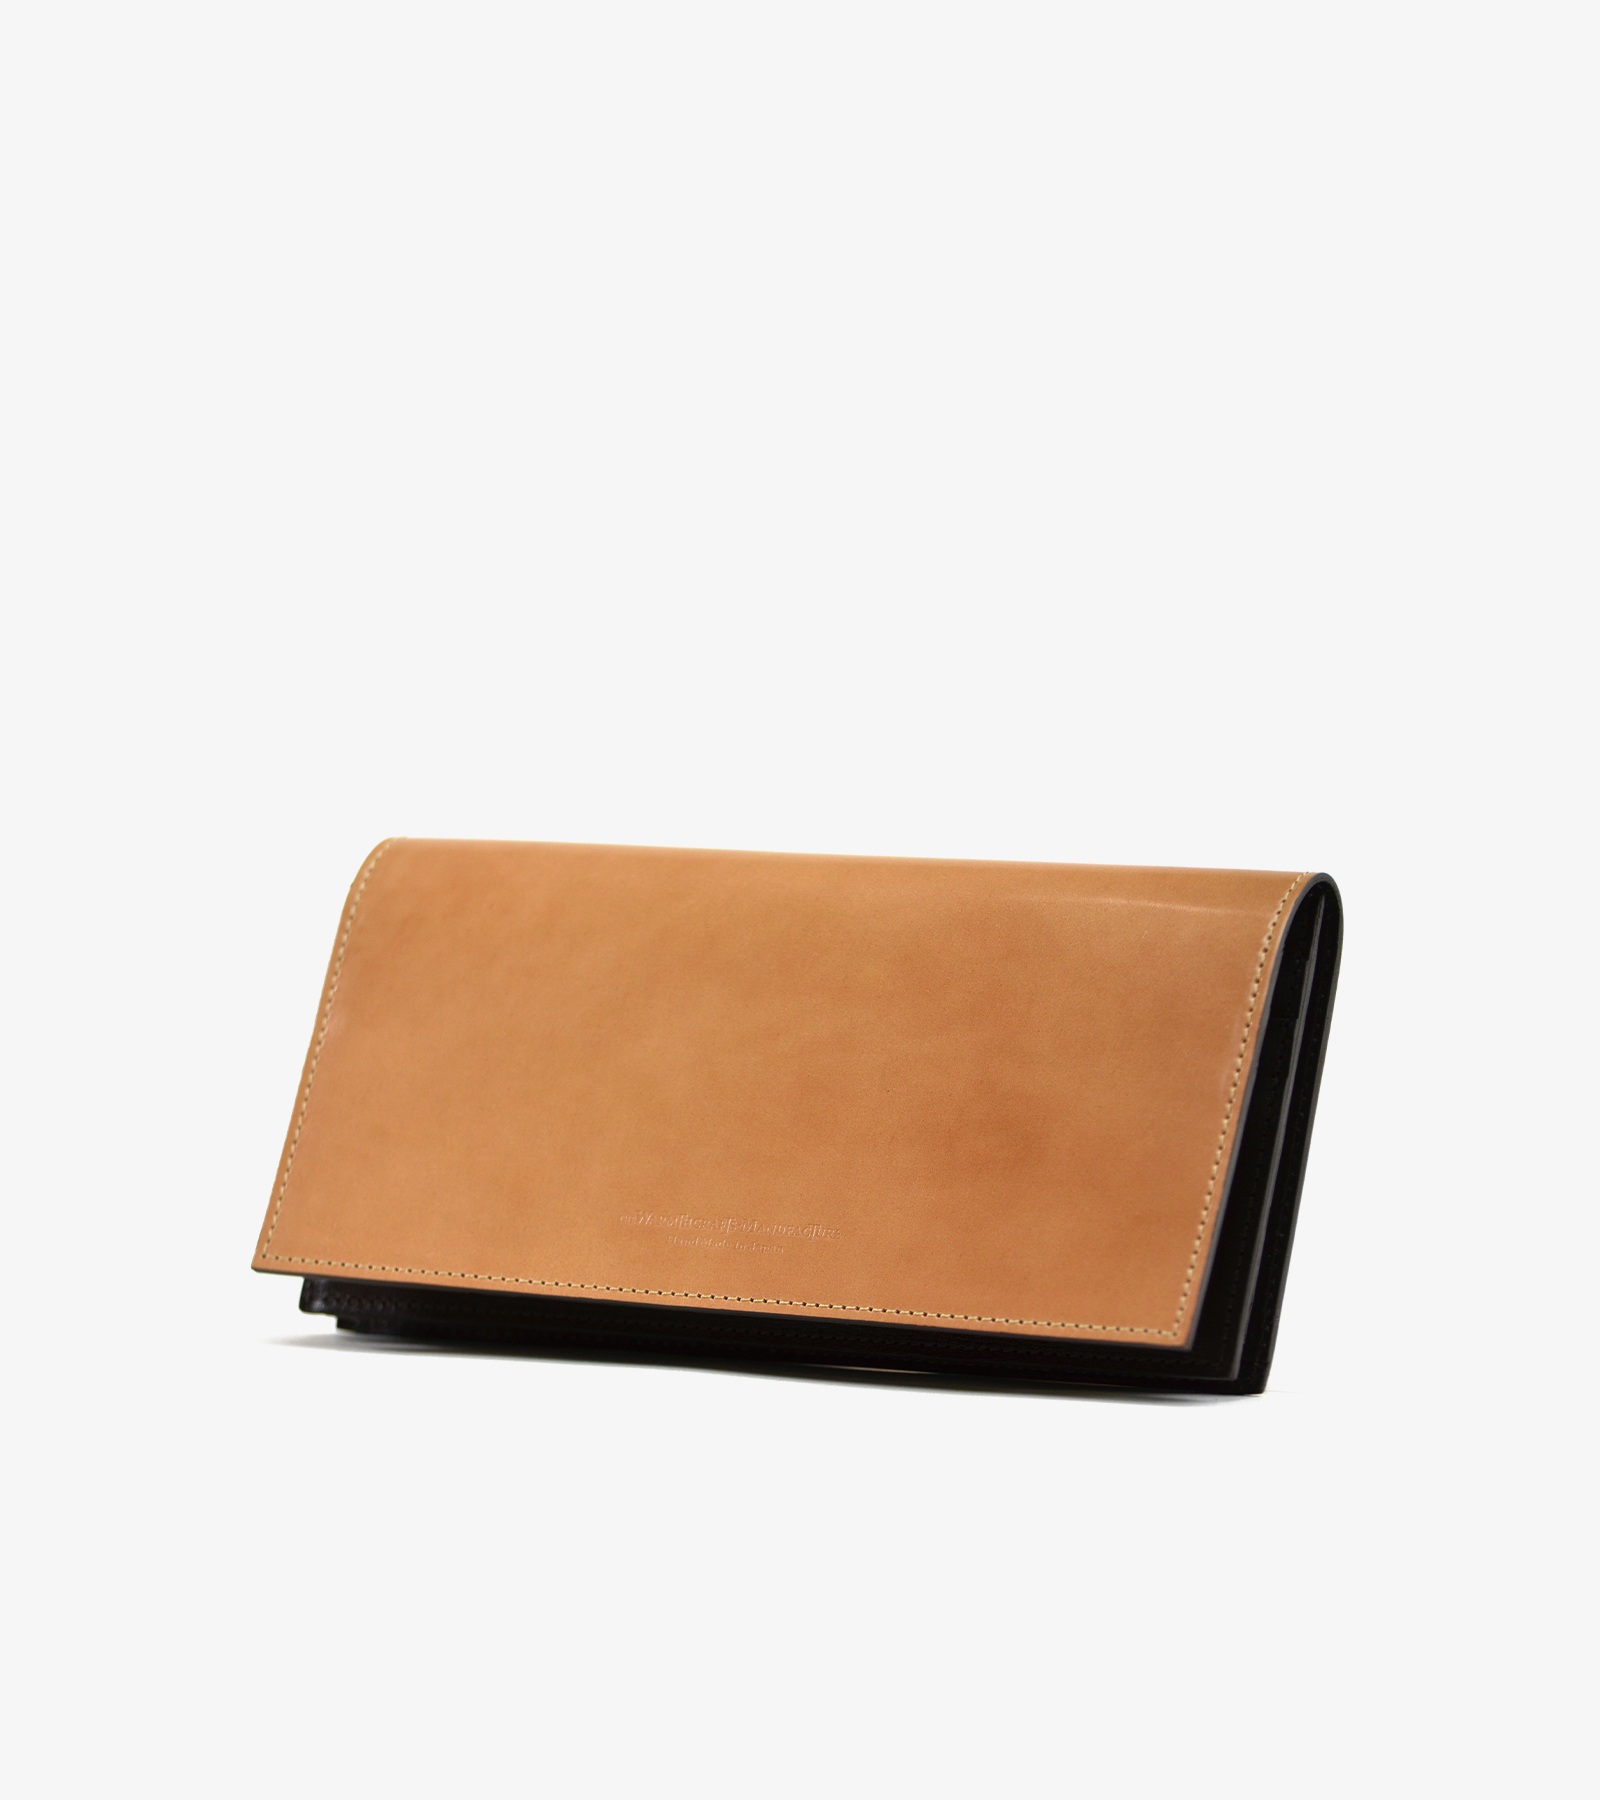 CORDOVAN LONG WALLET2 / The Warmthcrafts Manufacture Web Store